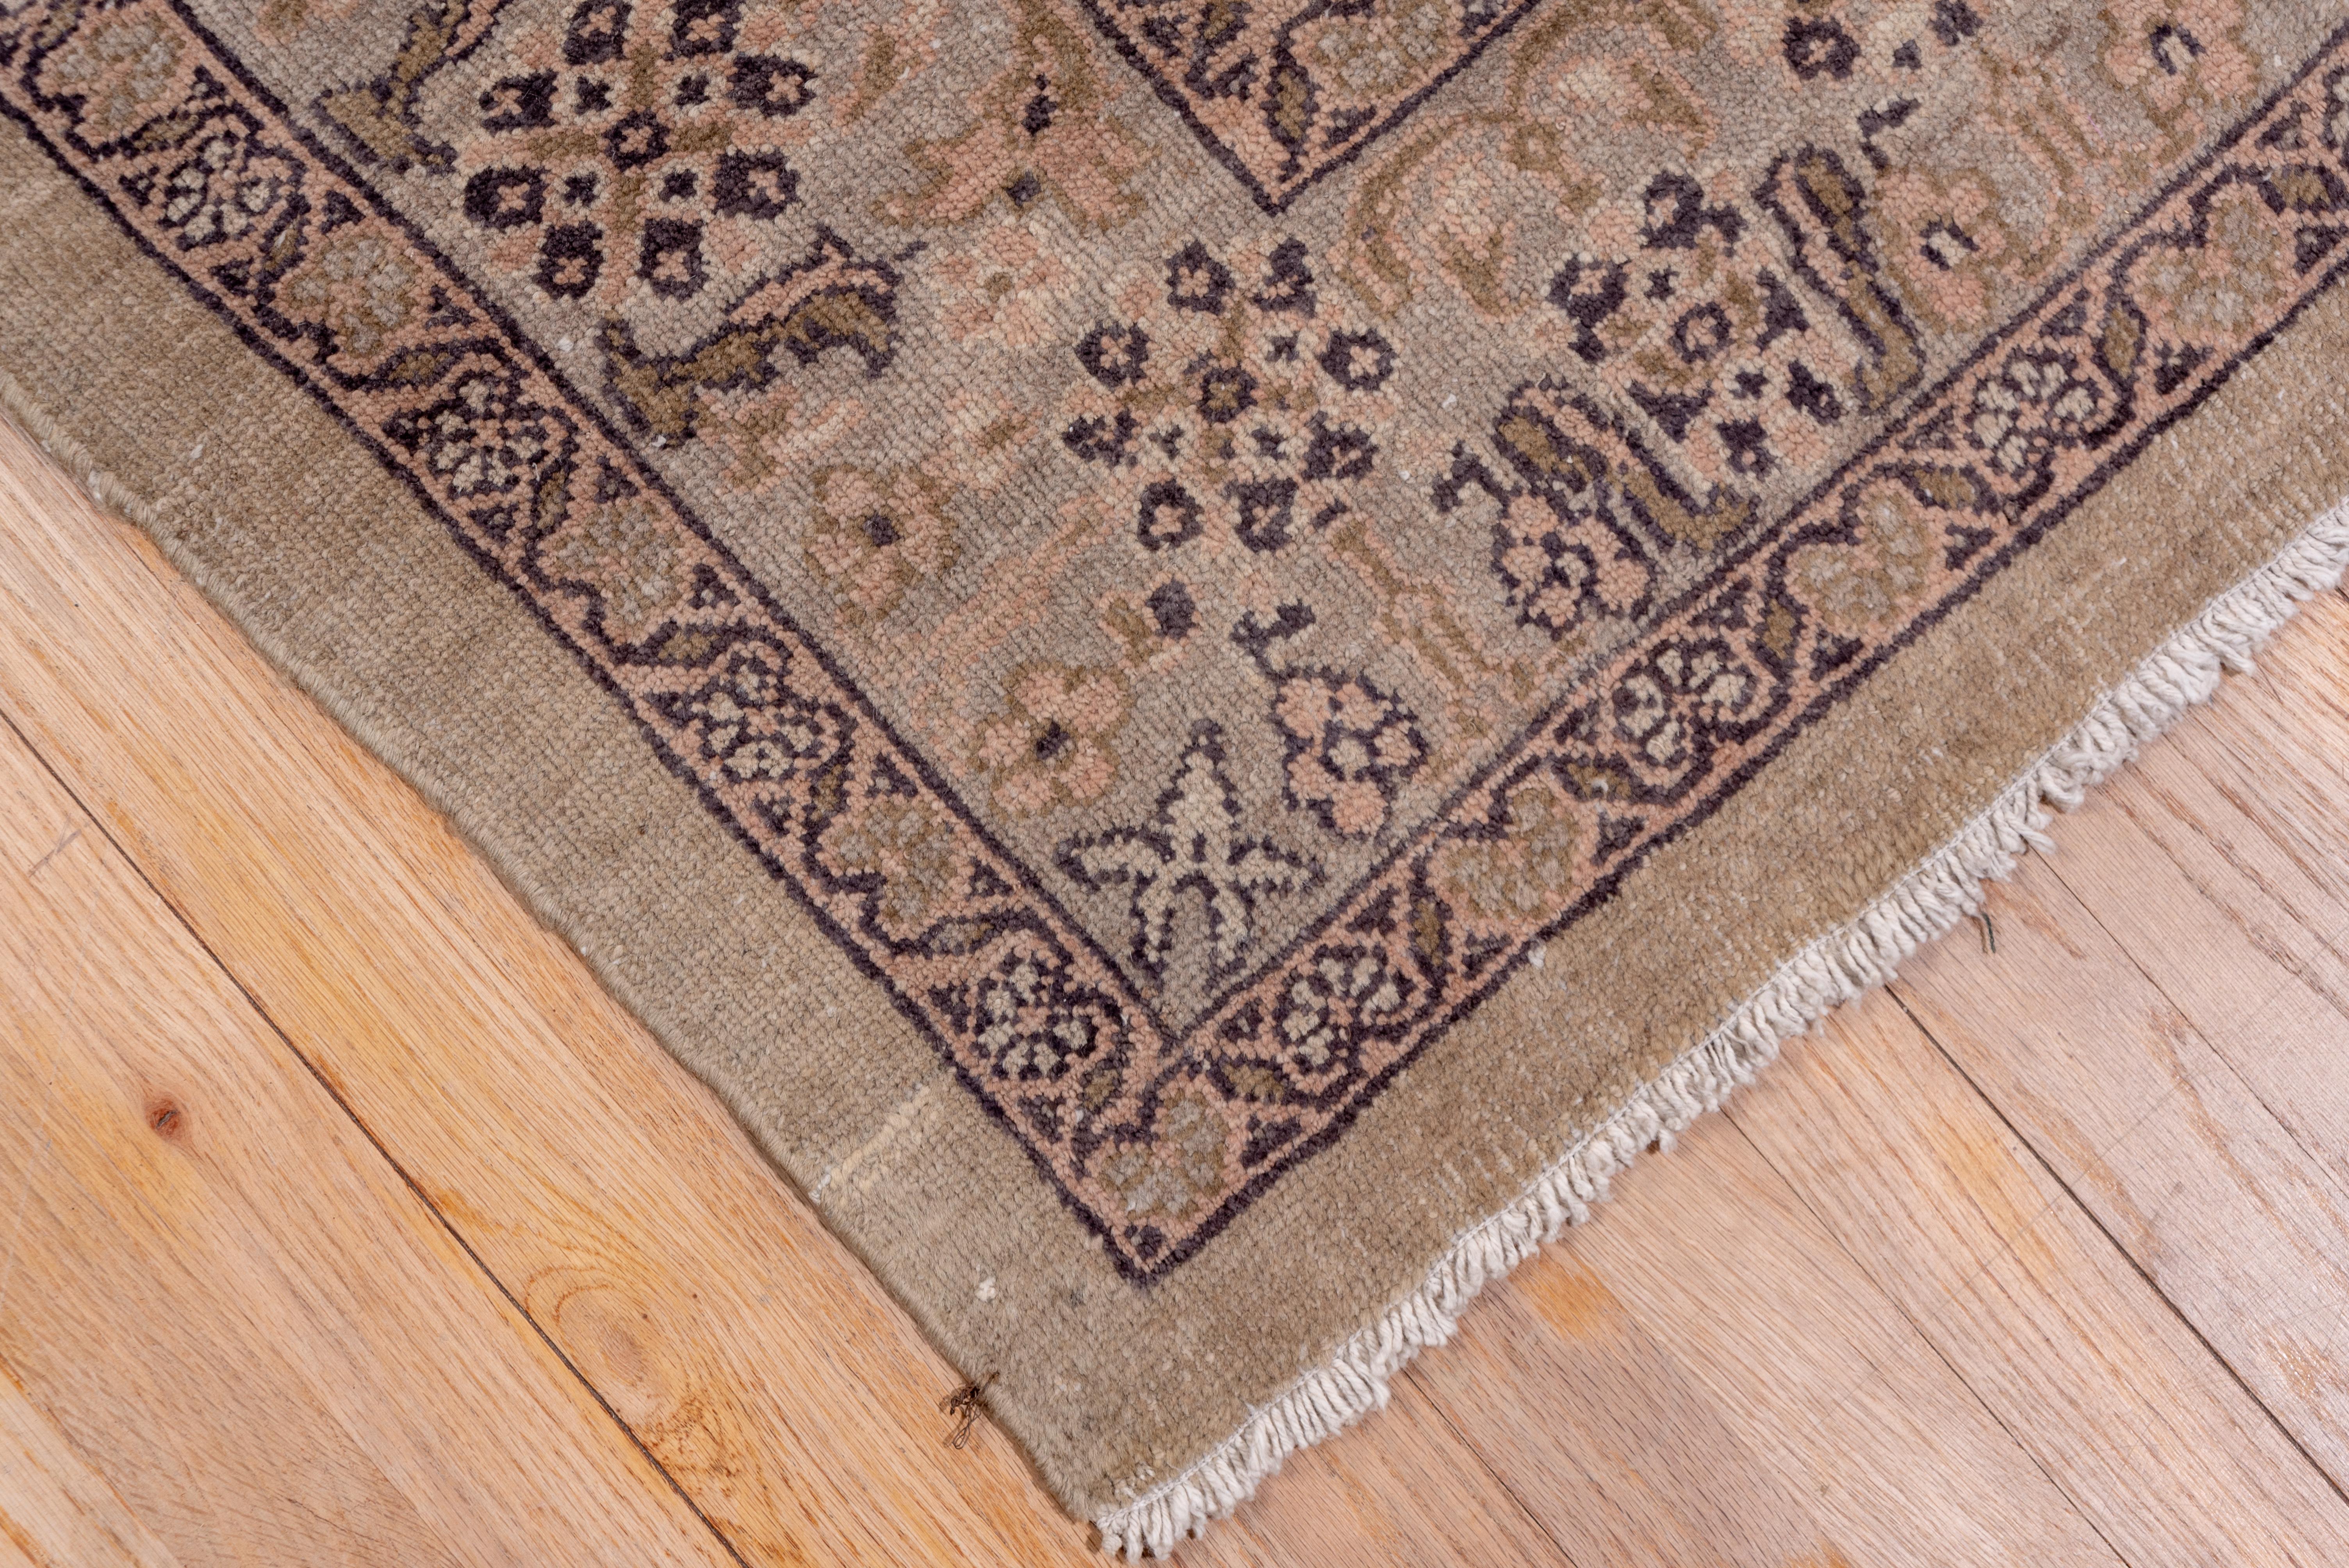 Light colored as most east Anatolian Sivas rugs are, this city carpet features a beige-grounded cartouche, lozenge lattice enclosing multi-flower plants, simple palmettes and equally simple leaves. Eight petal rosettes switch back and forth in the